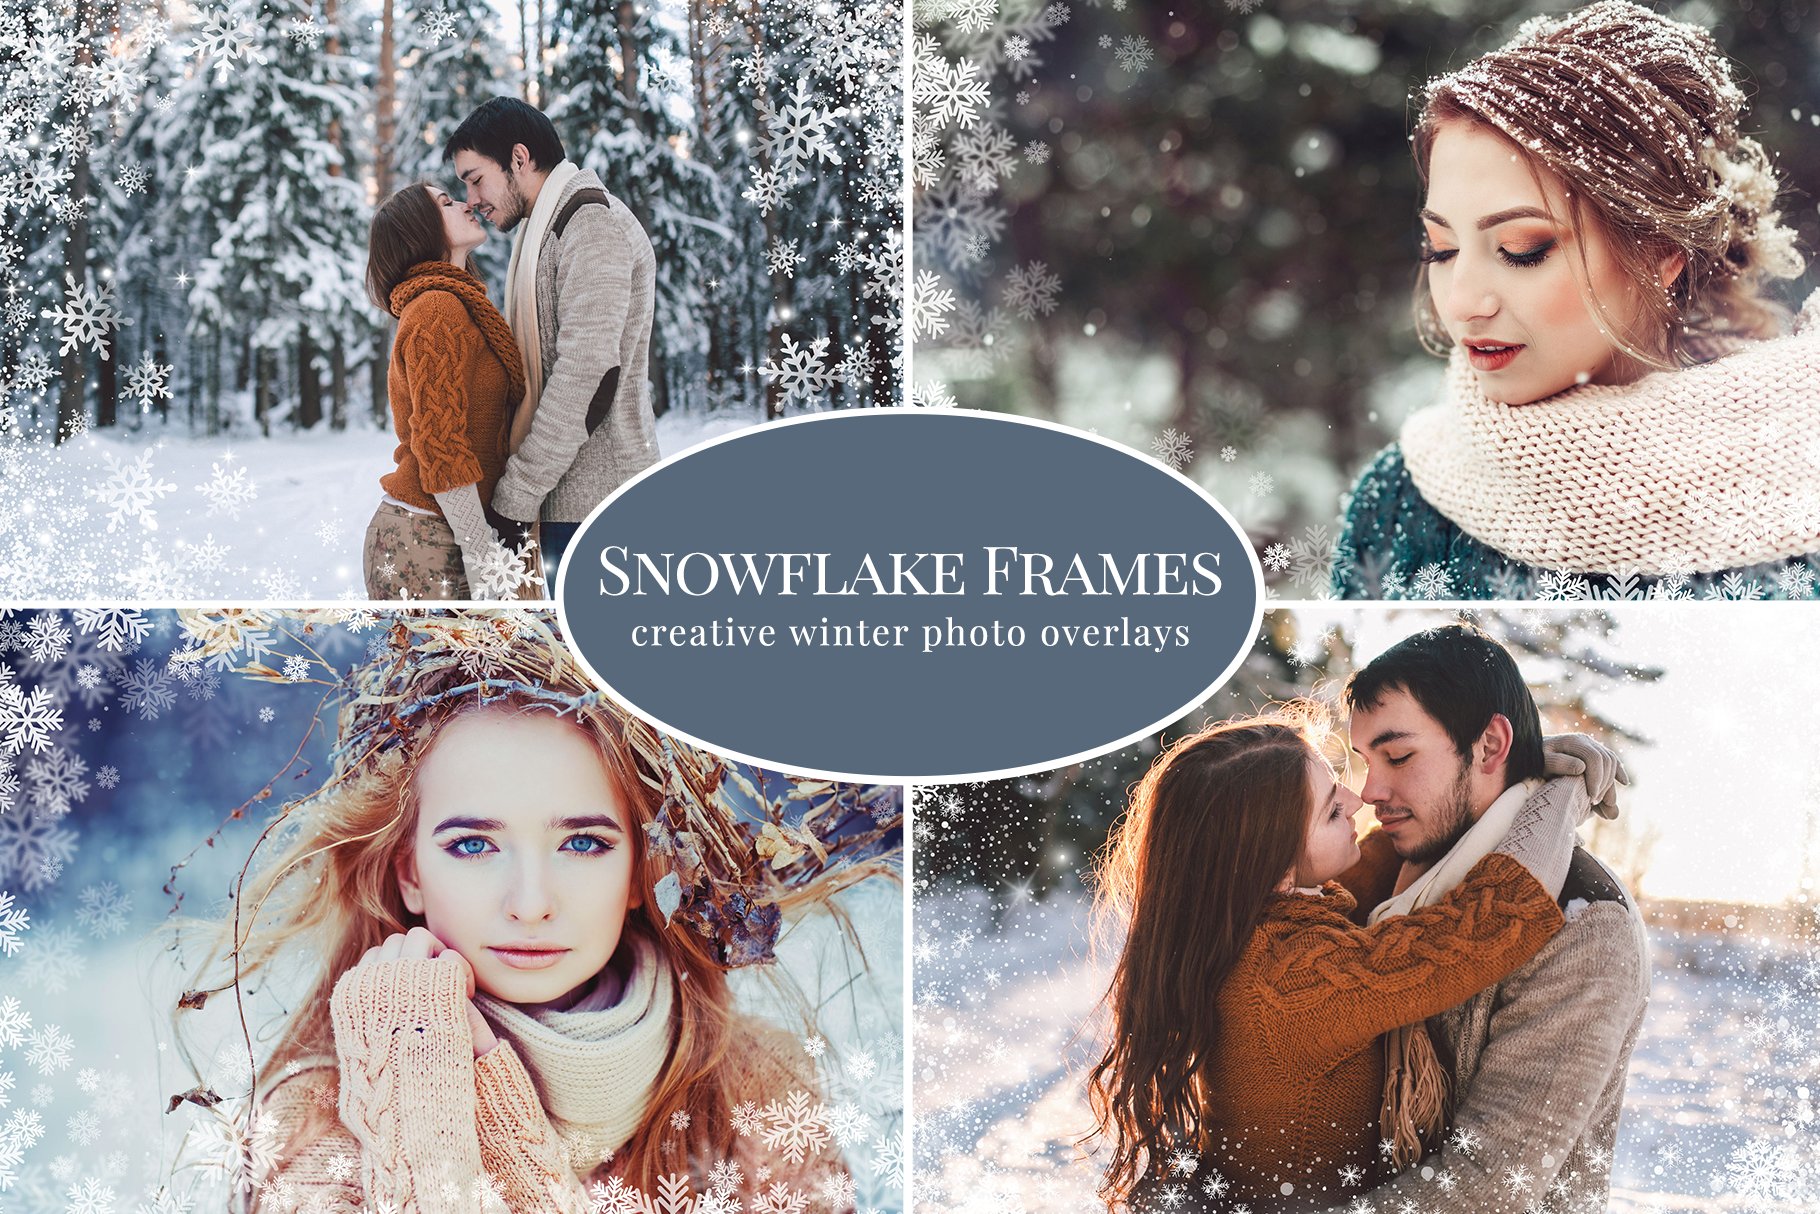 Snowflake Frames photo overlayscover image.